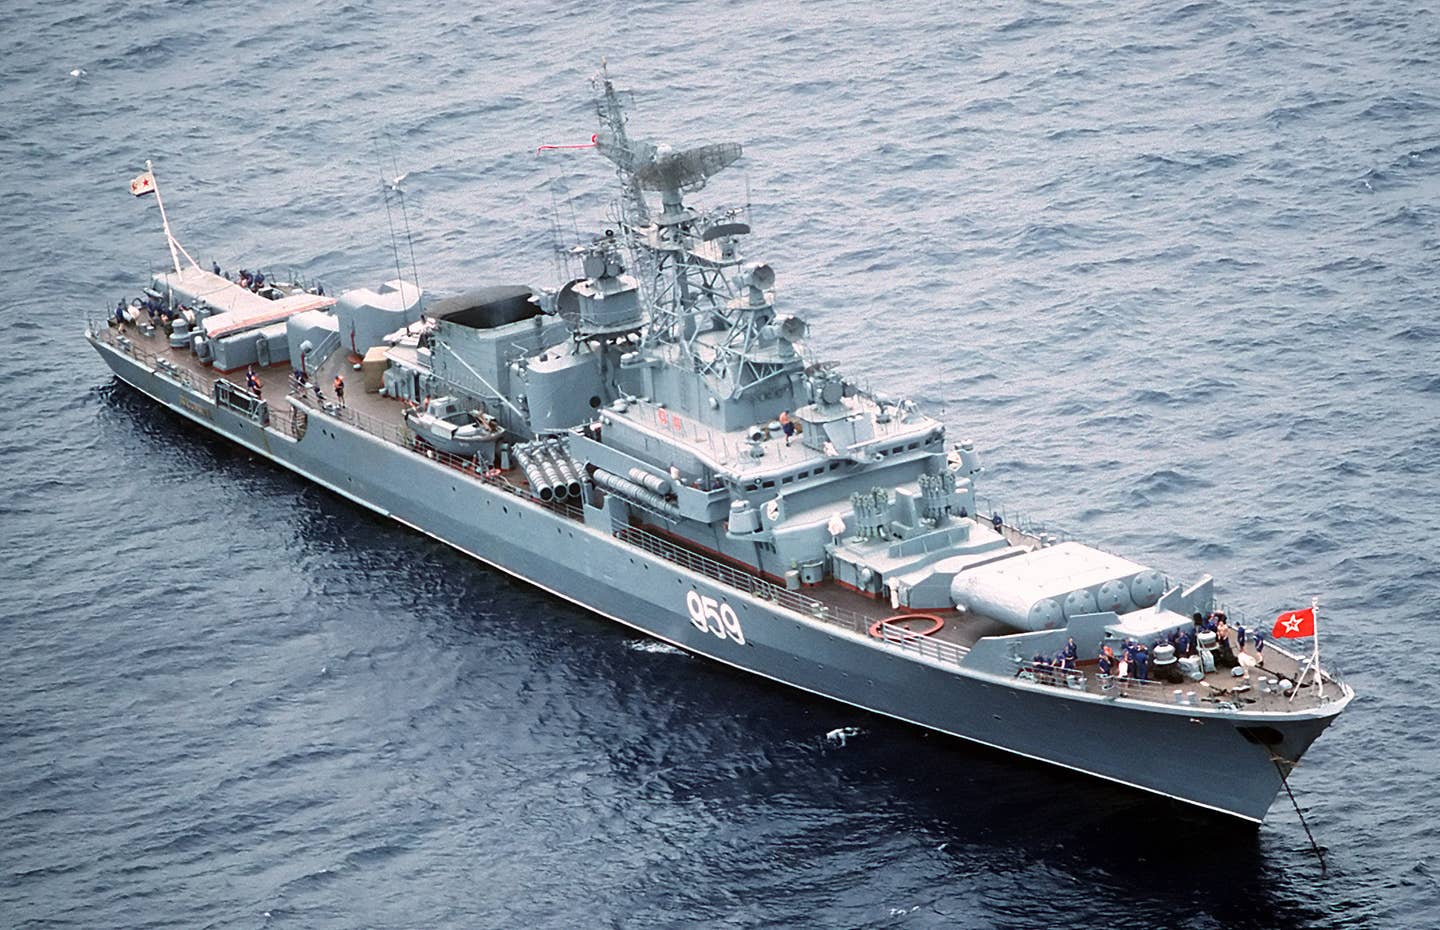 A Krivak-class frigate at anchor. (Photo from Wikimedia Commons)